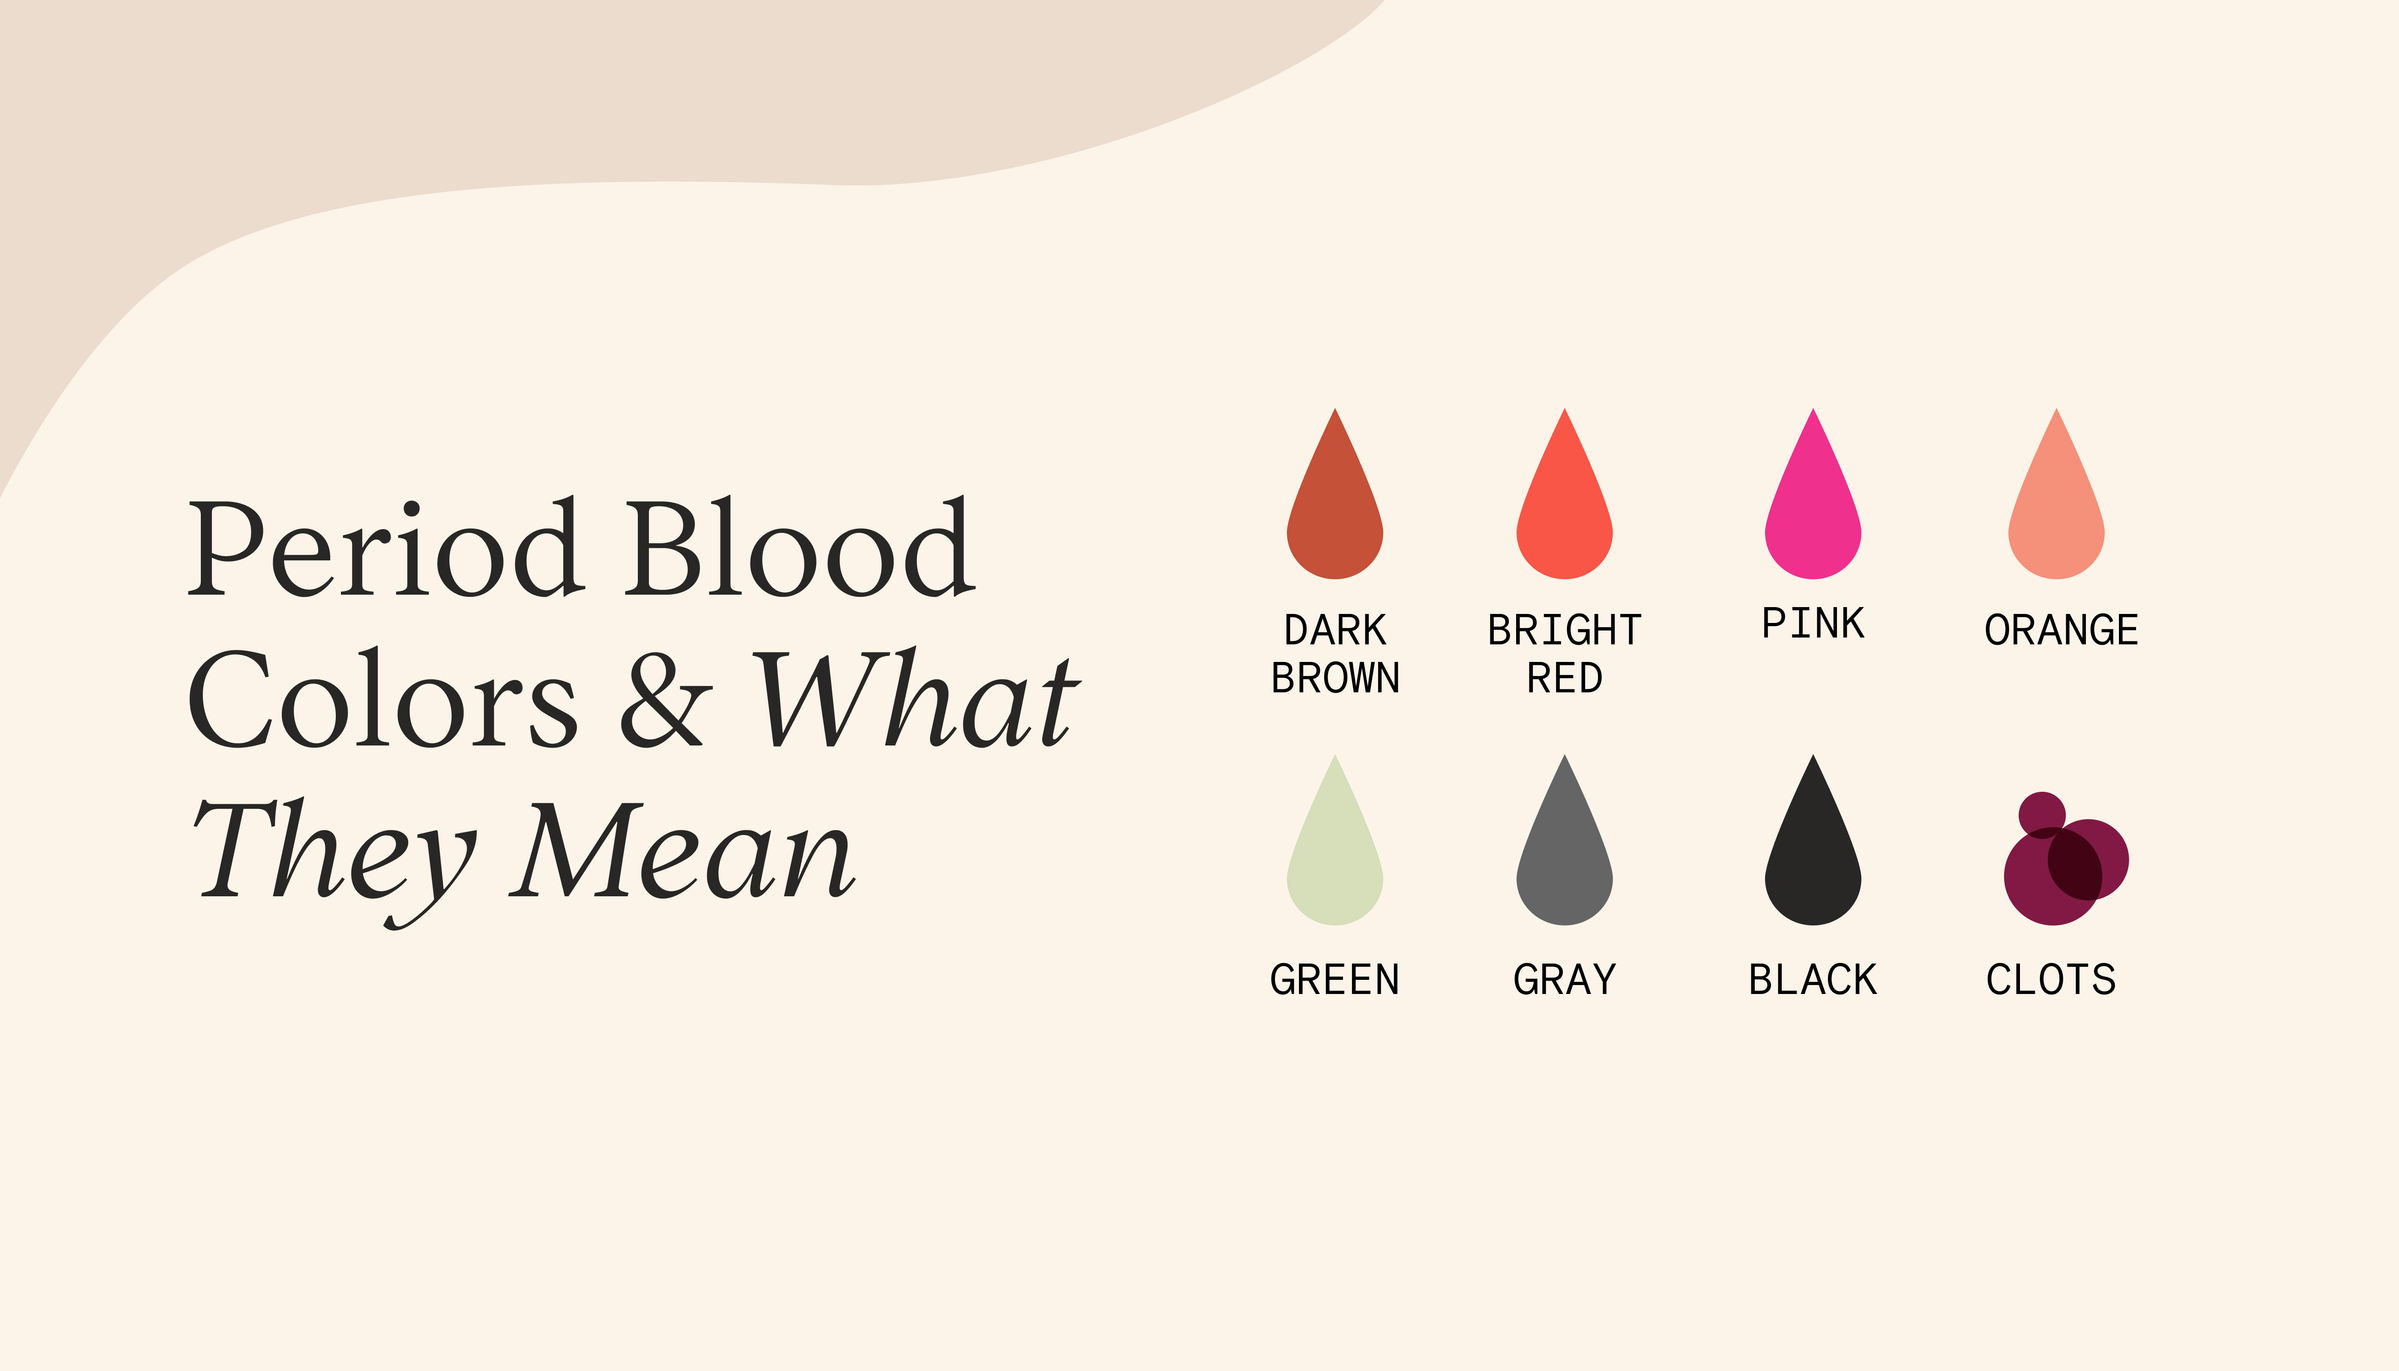 Period Blood Clots: Causes & How To Manage Them